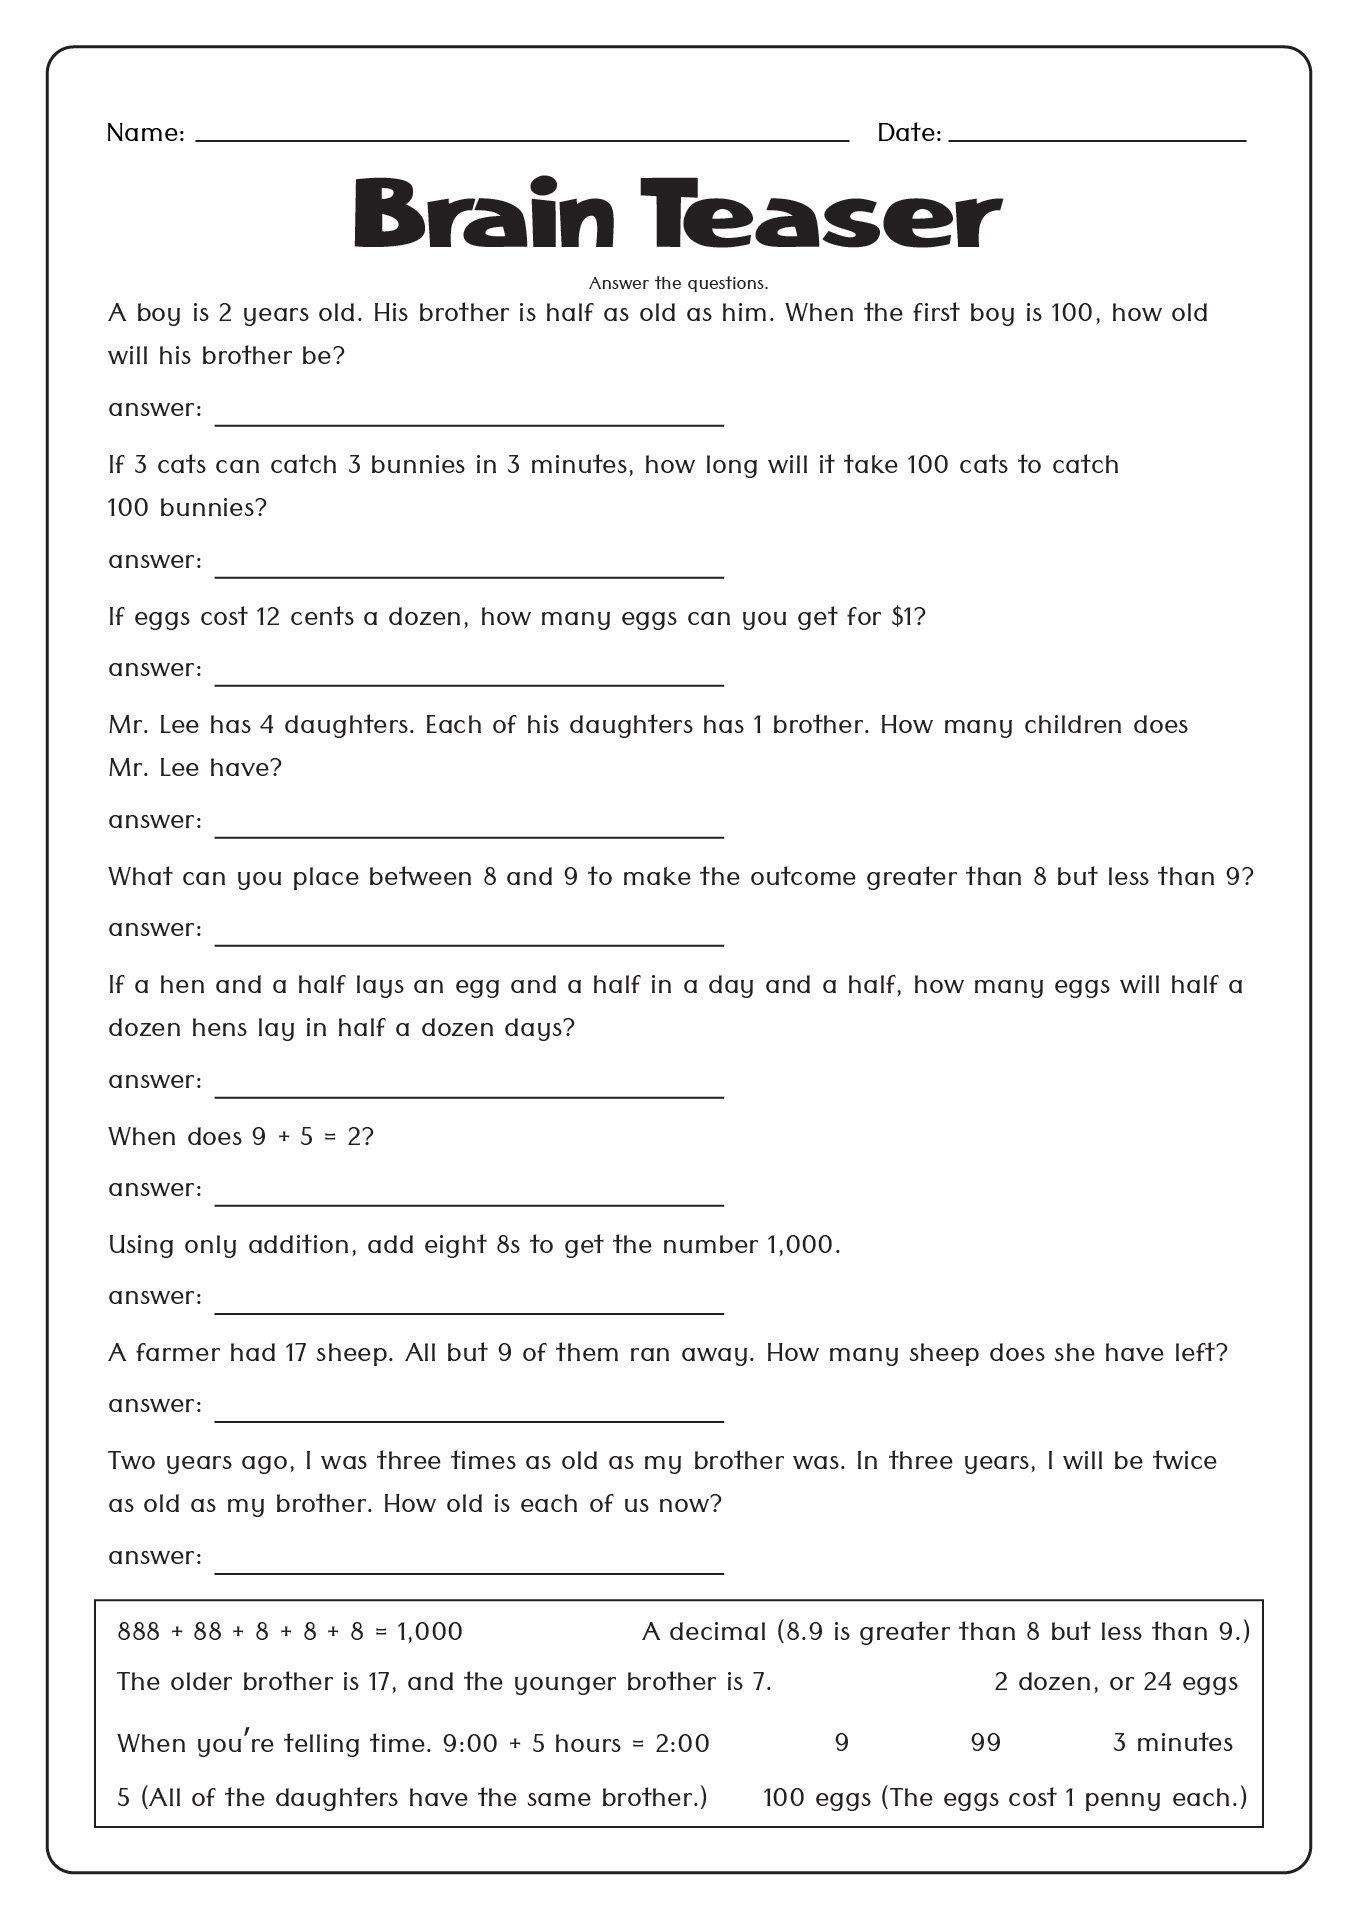 brain-teasers-with-answers-printable